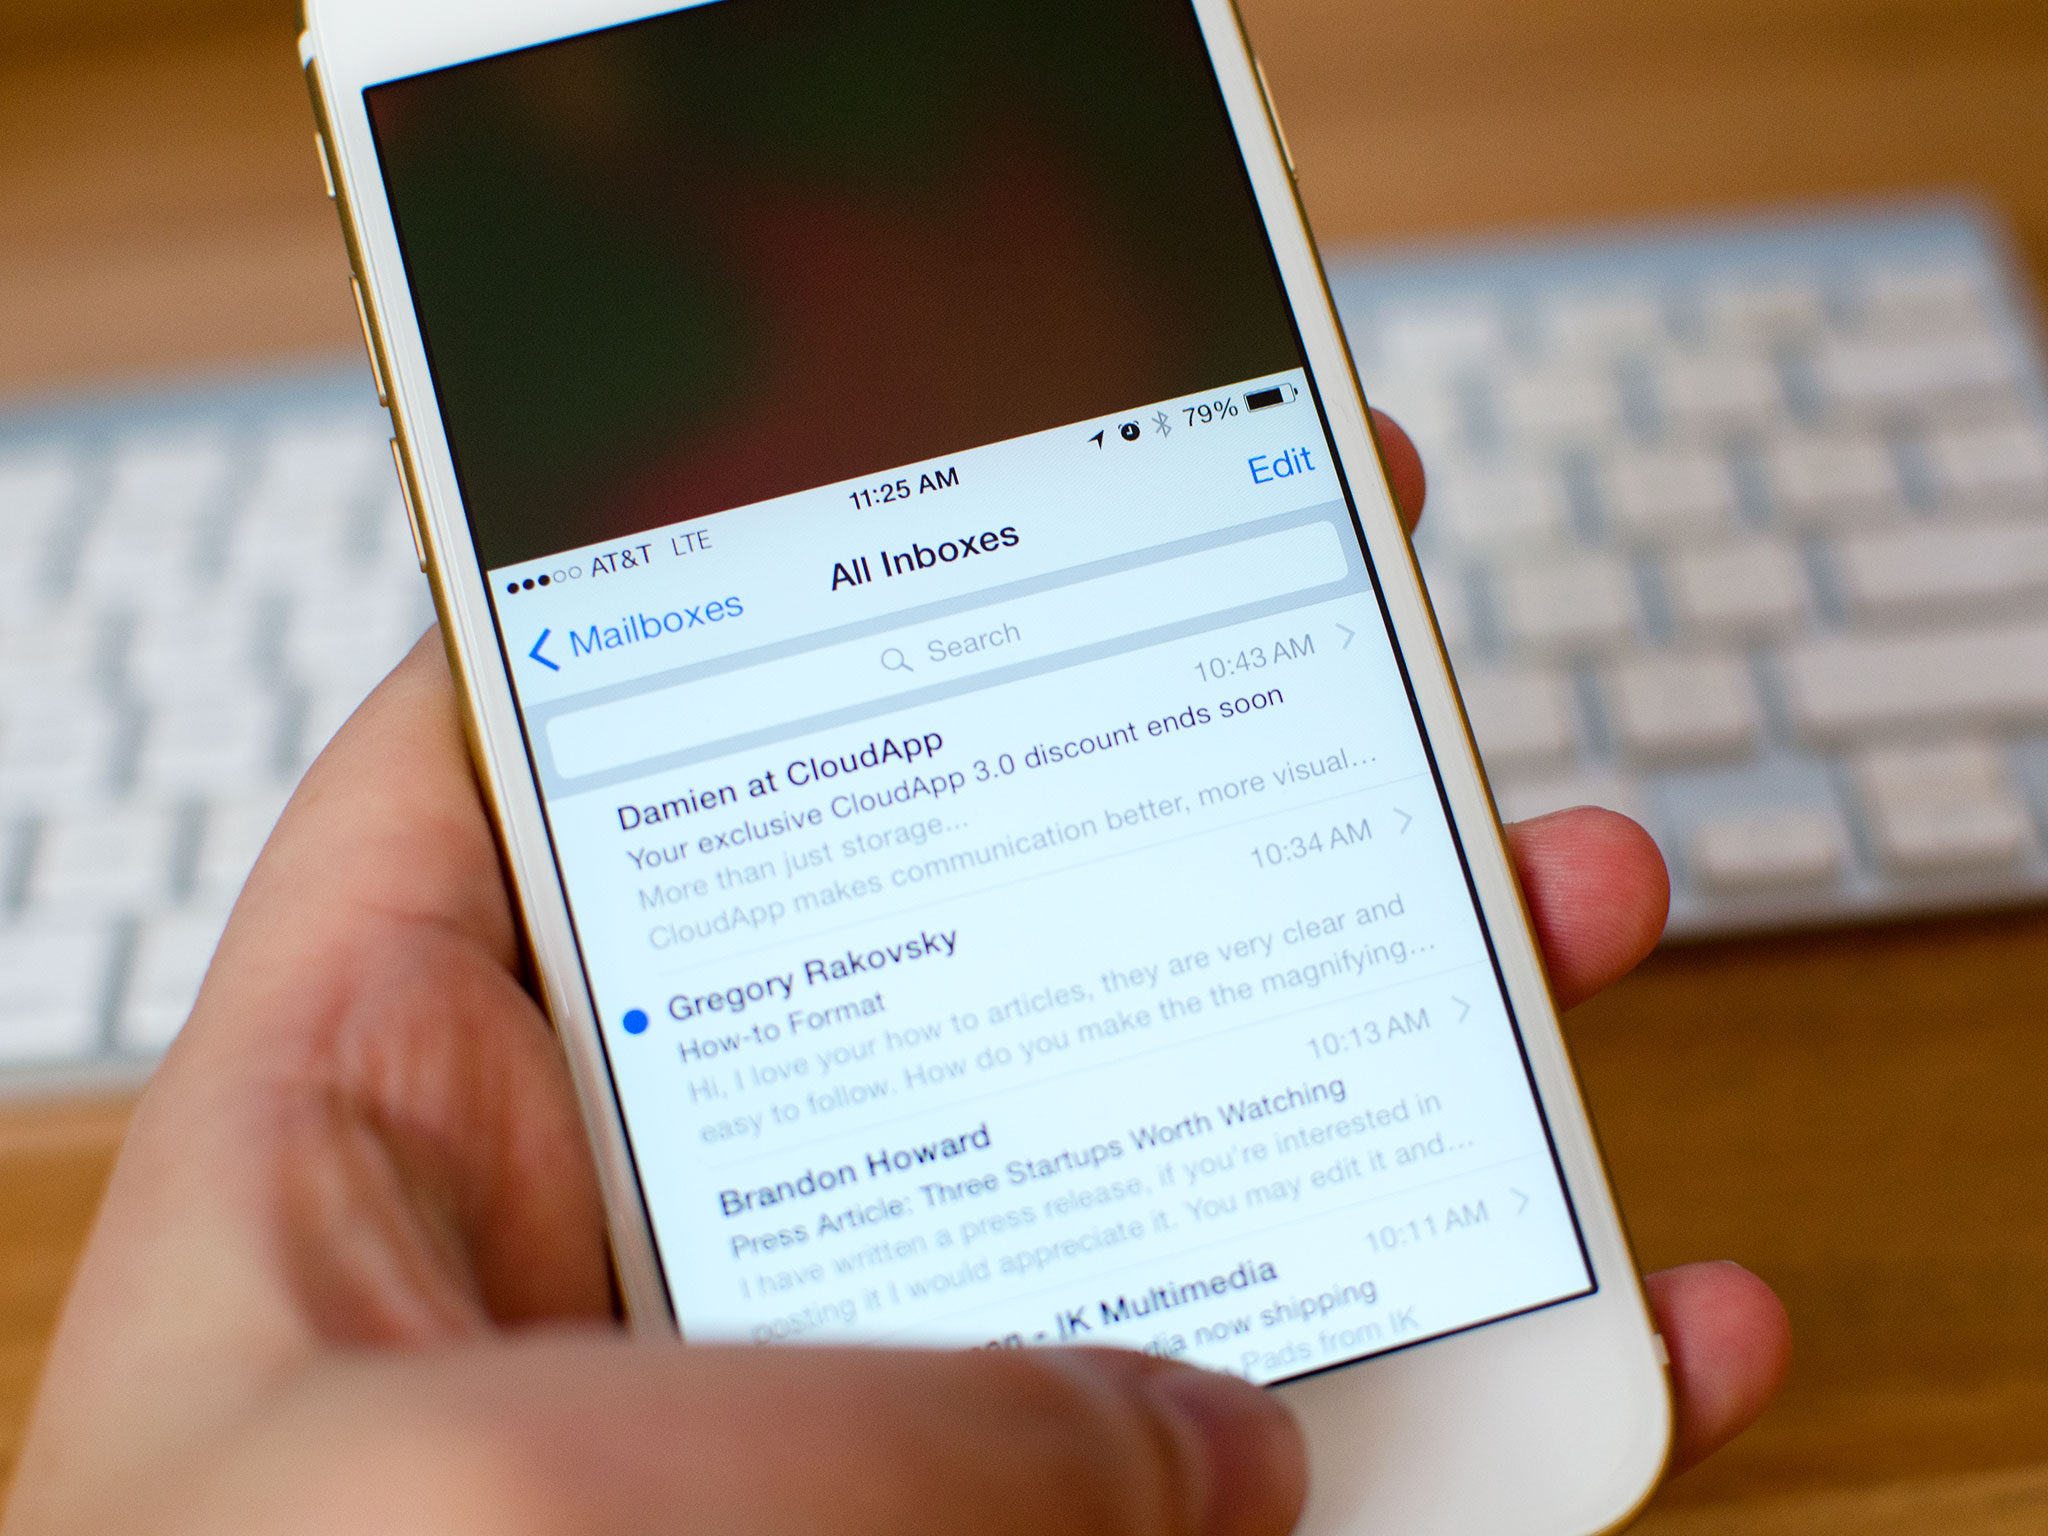 How to use the iPhone 6 and 6 Plus one-handed with Reachability